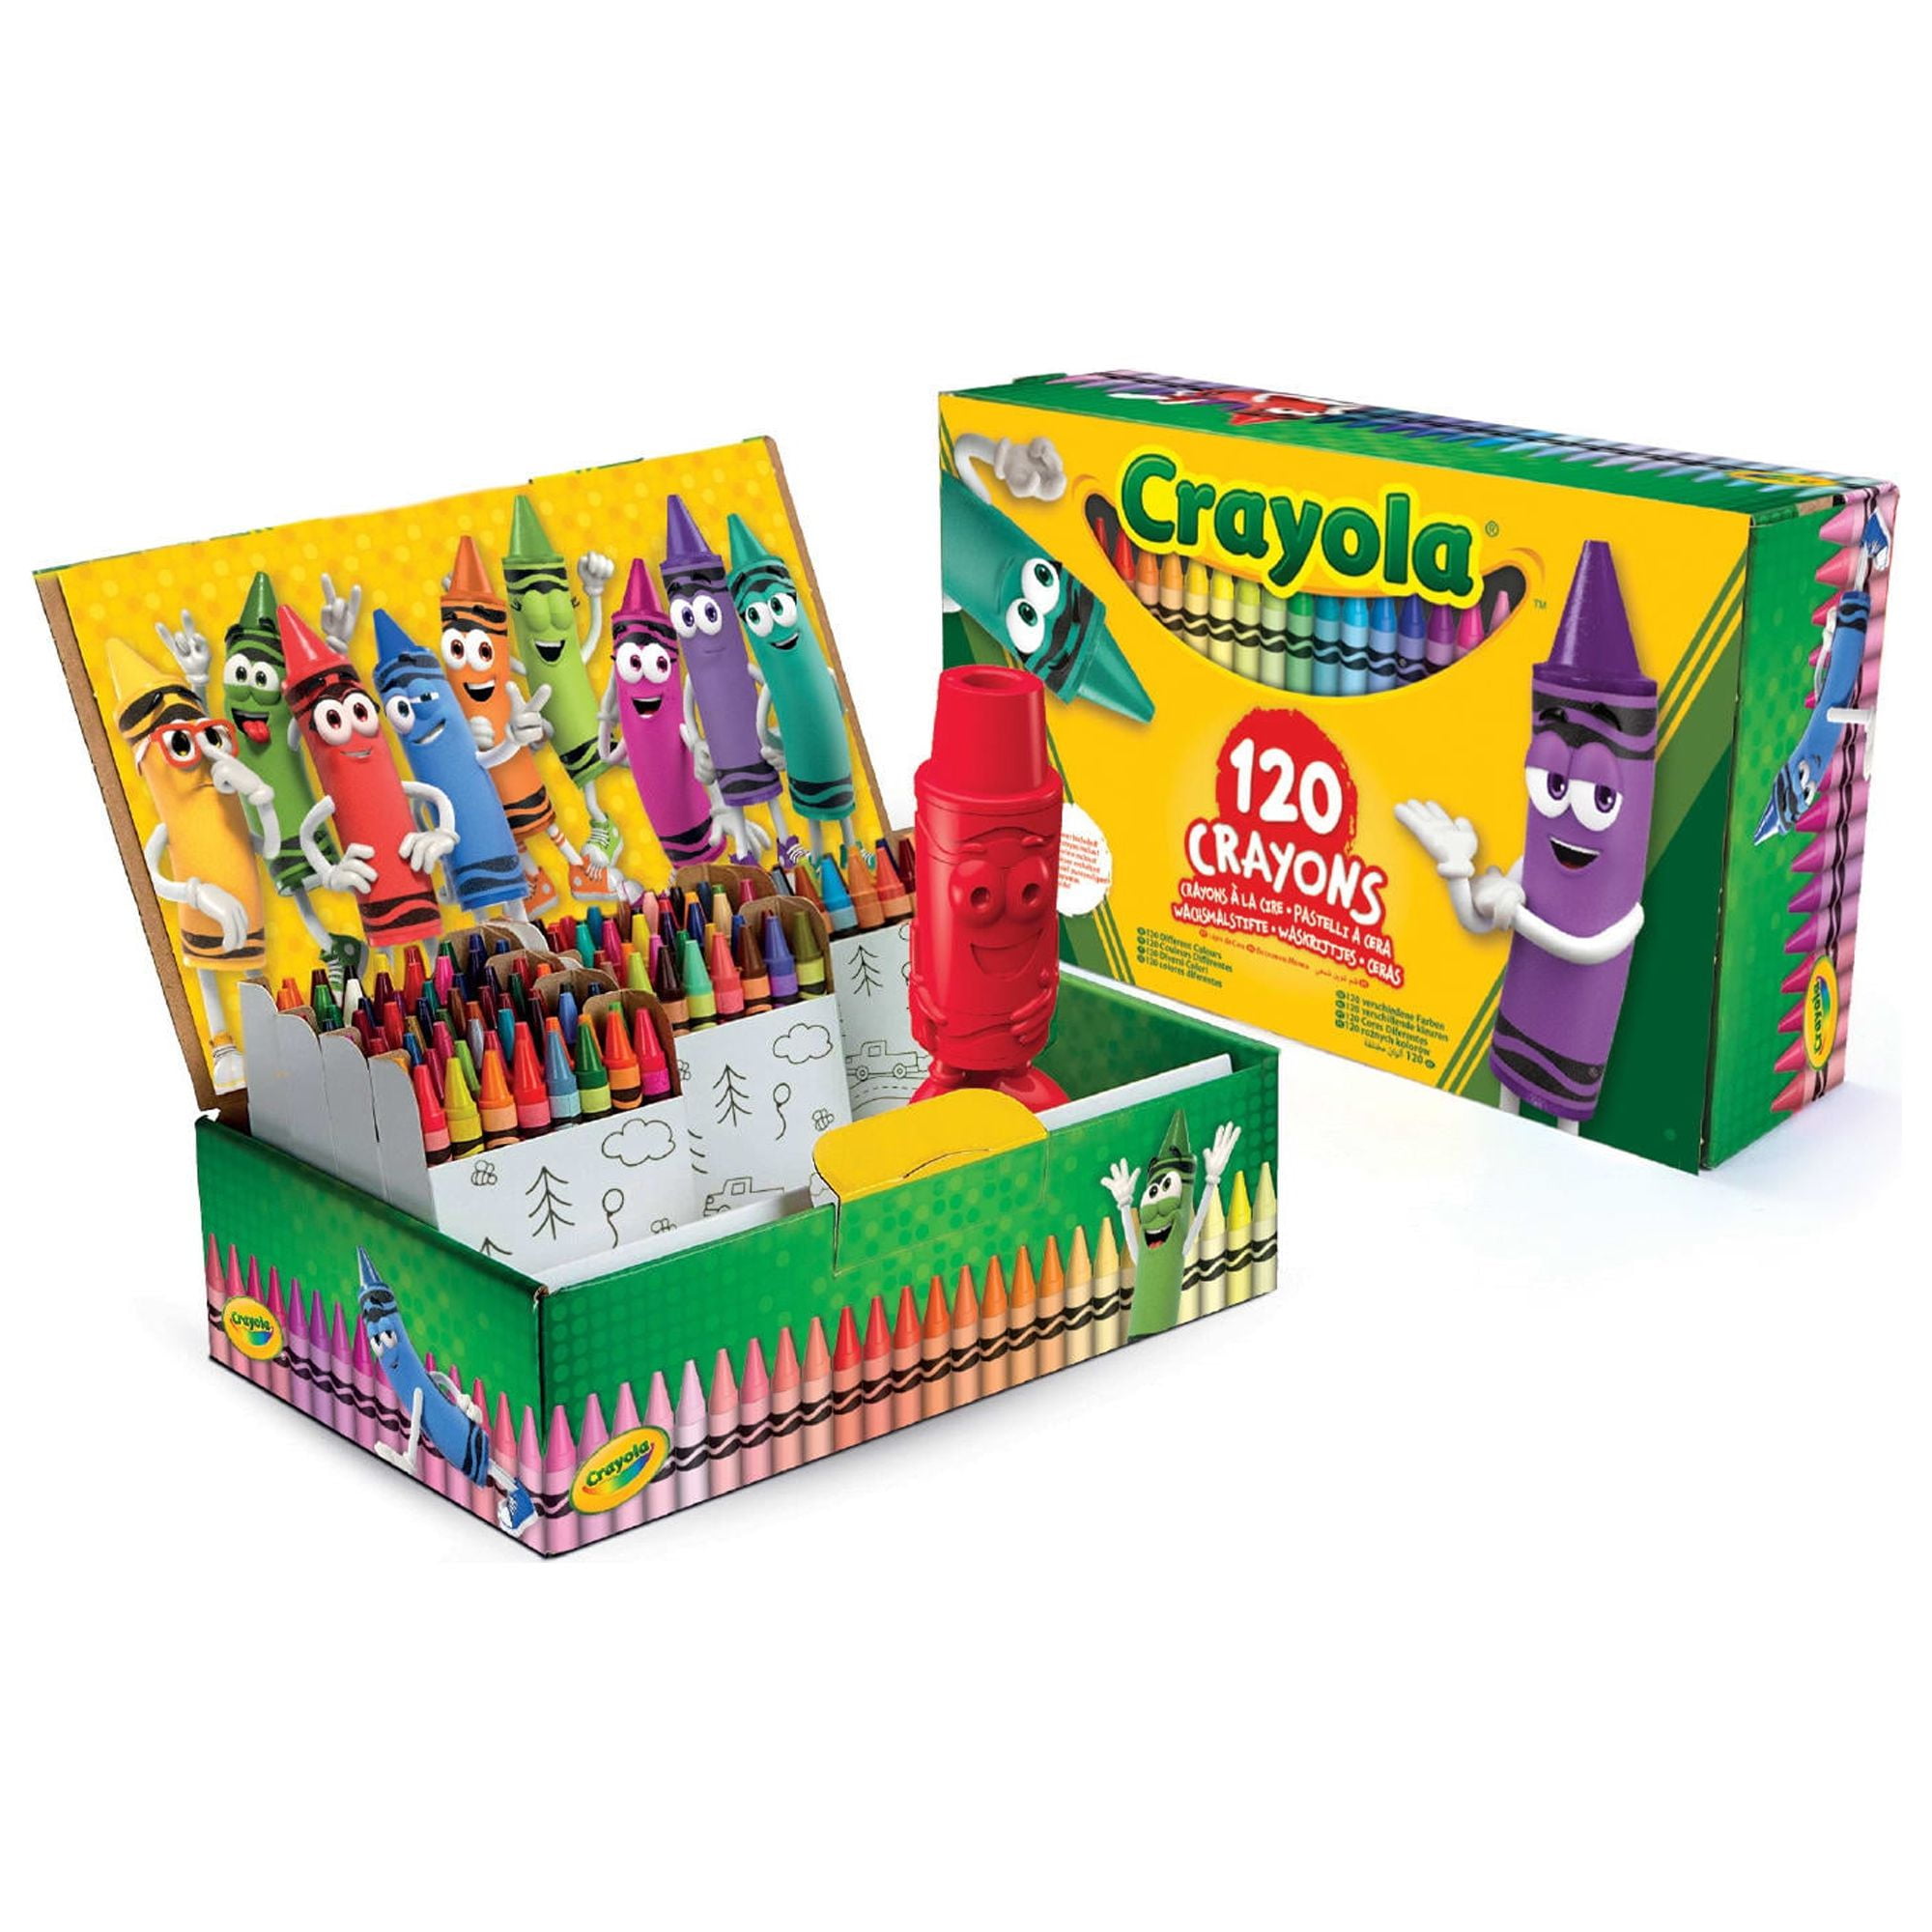 Crayola Crayons - Giant Box of 120 Assorted Colors